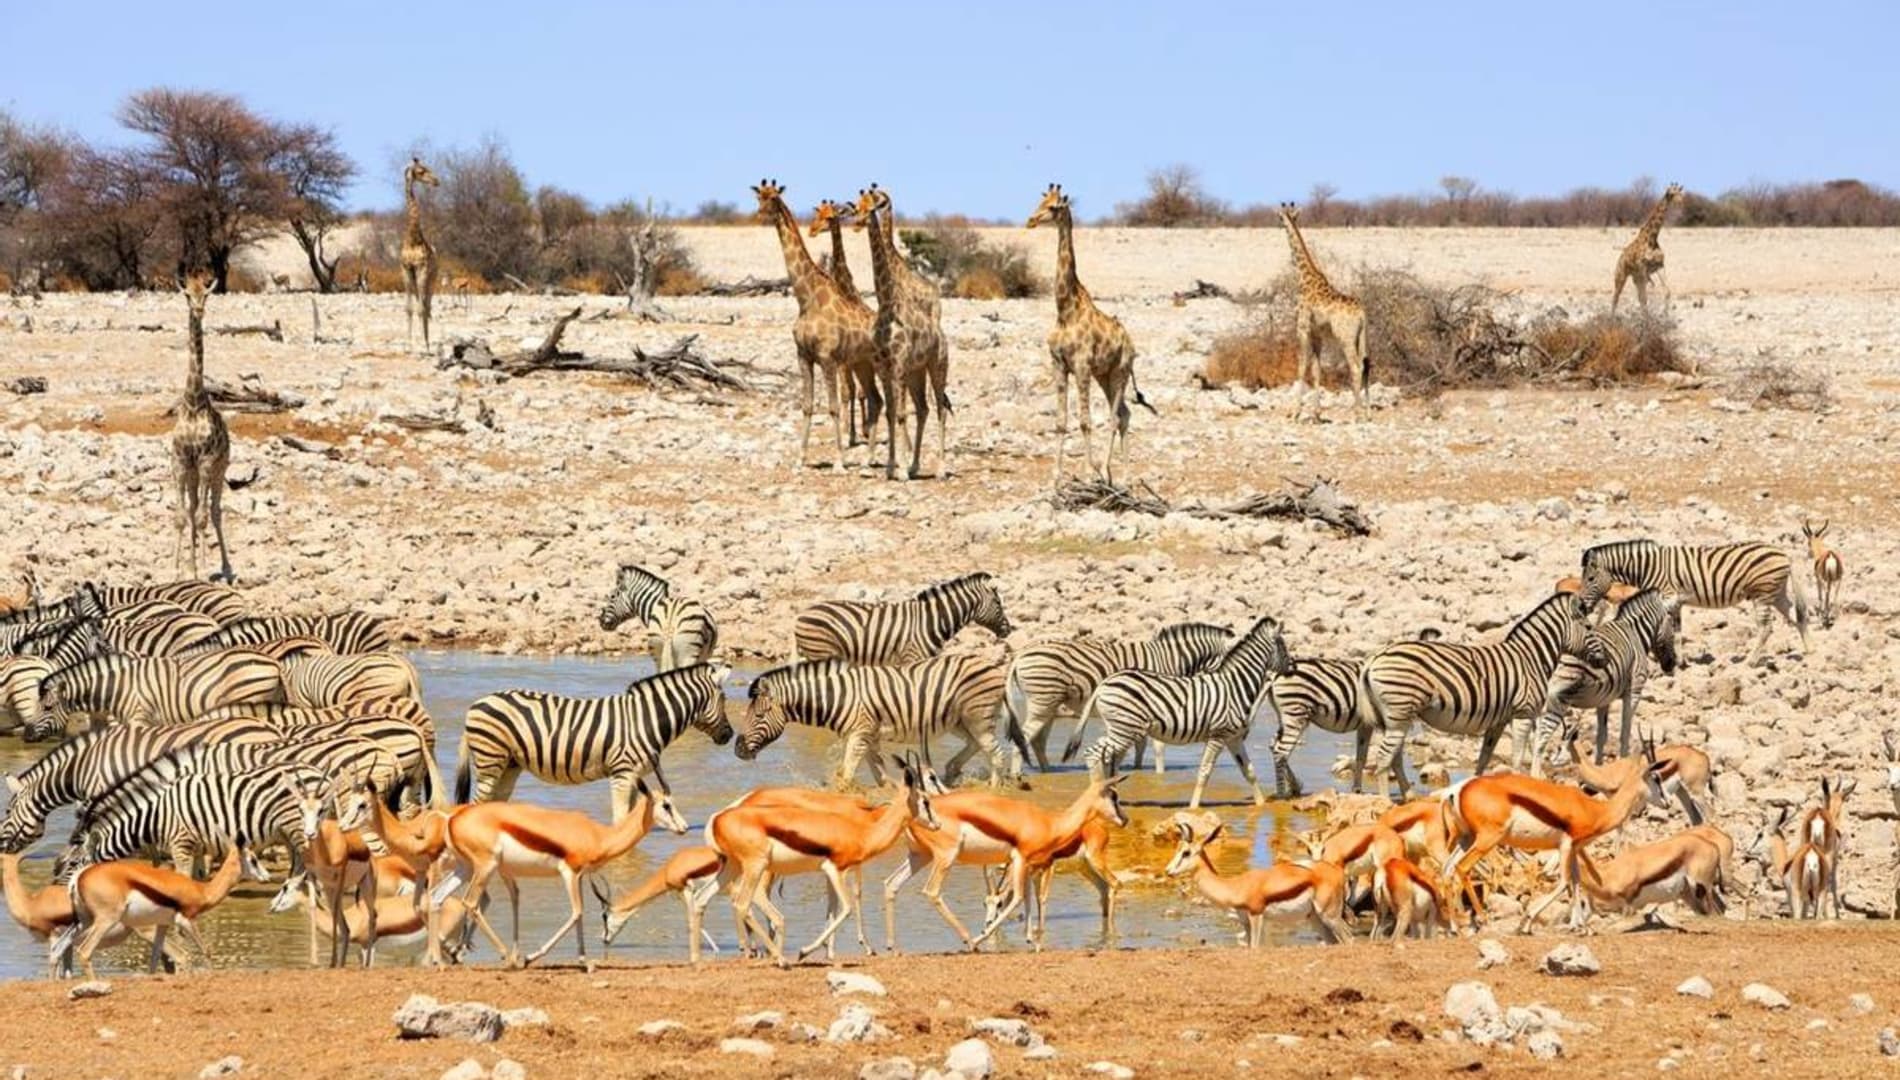 Namibia Safari From Spain: Everything you need to know